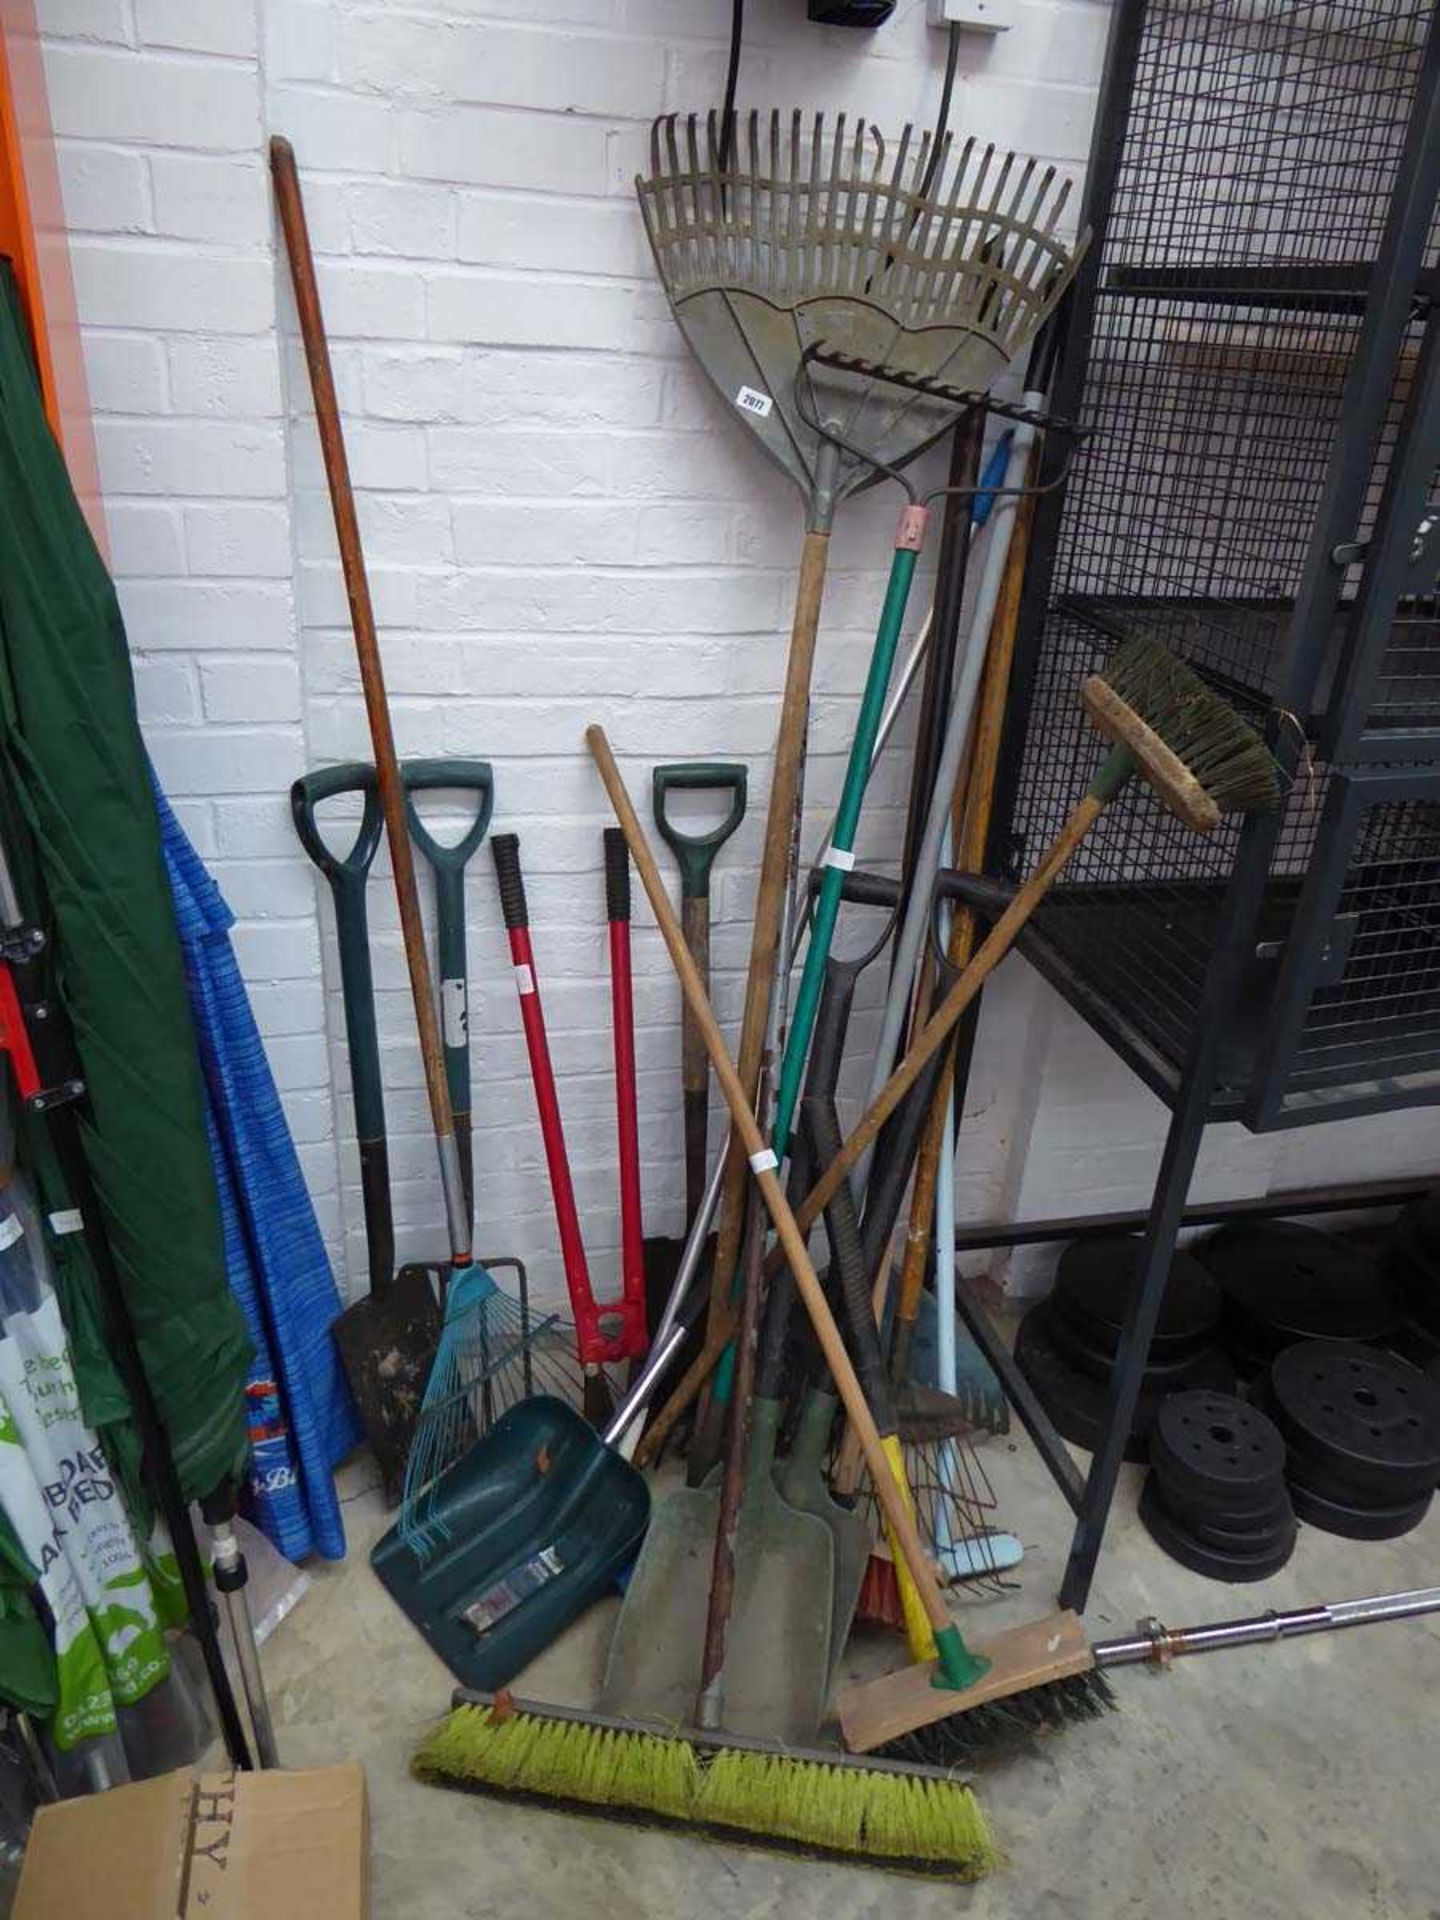 Large quantity of outdoor garden hand tools incl. forks, rakes, brushes, etc.